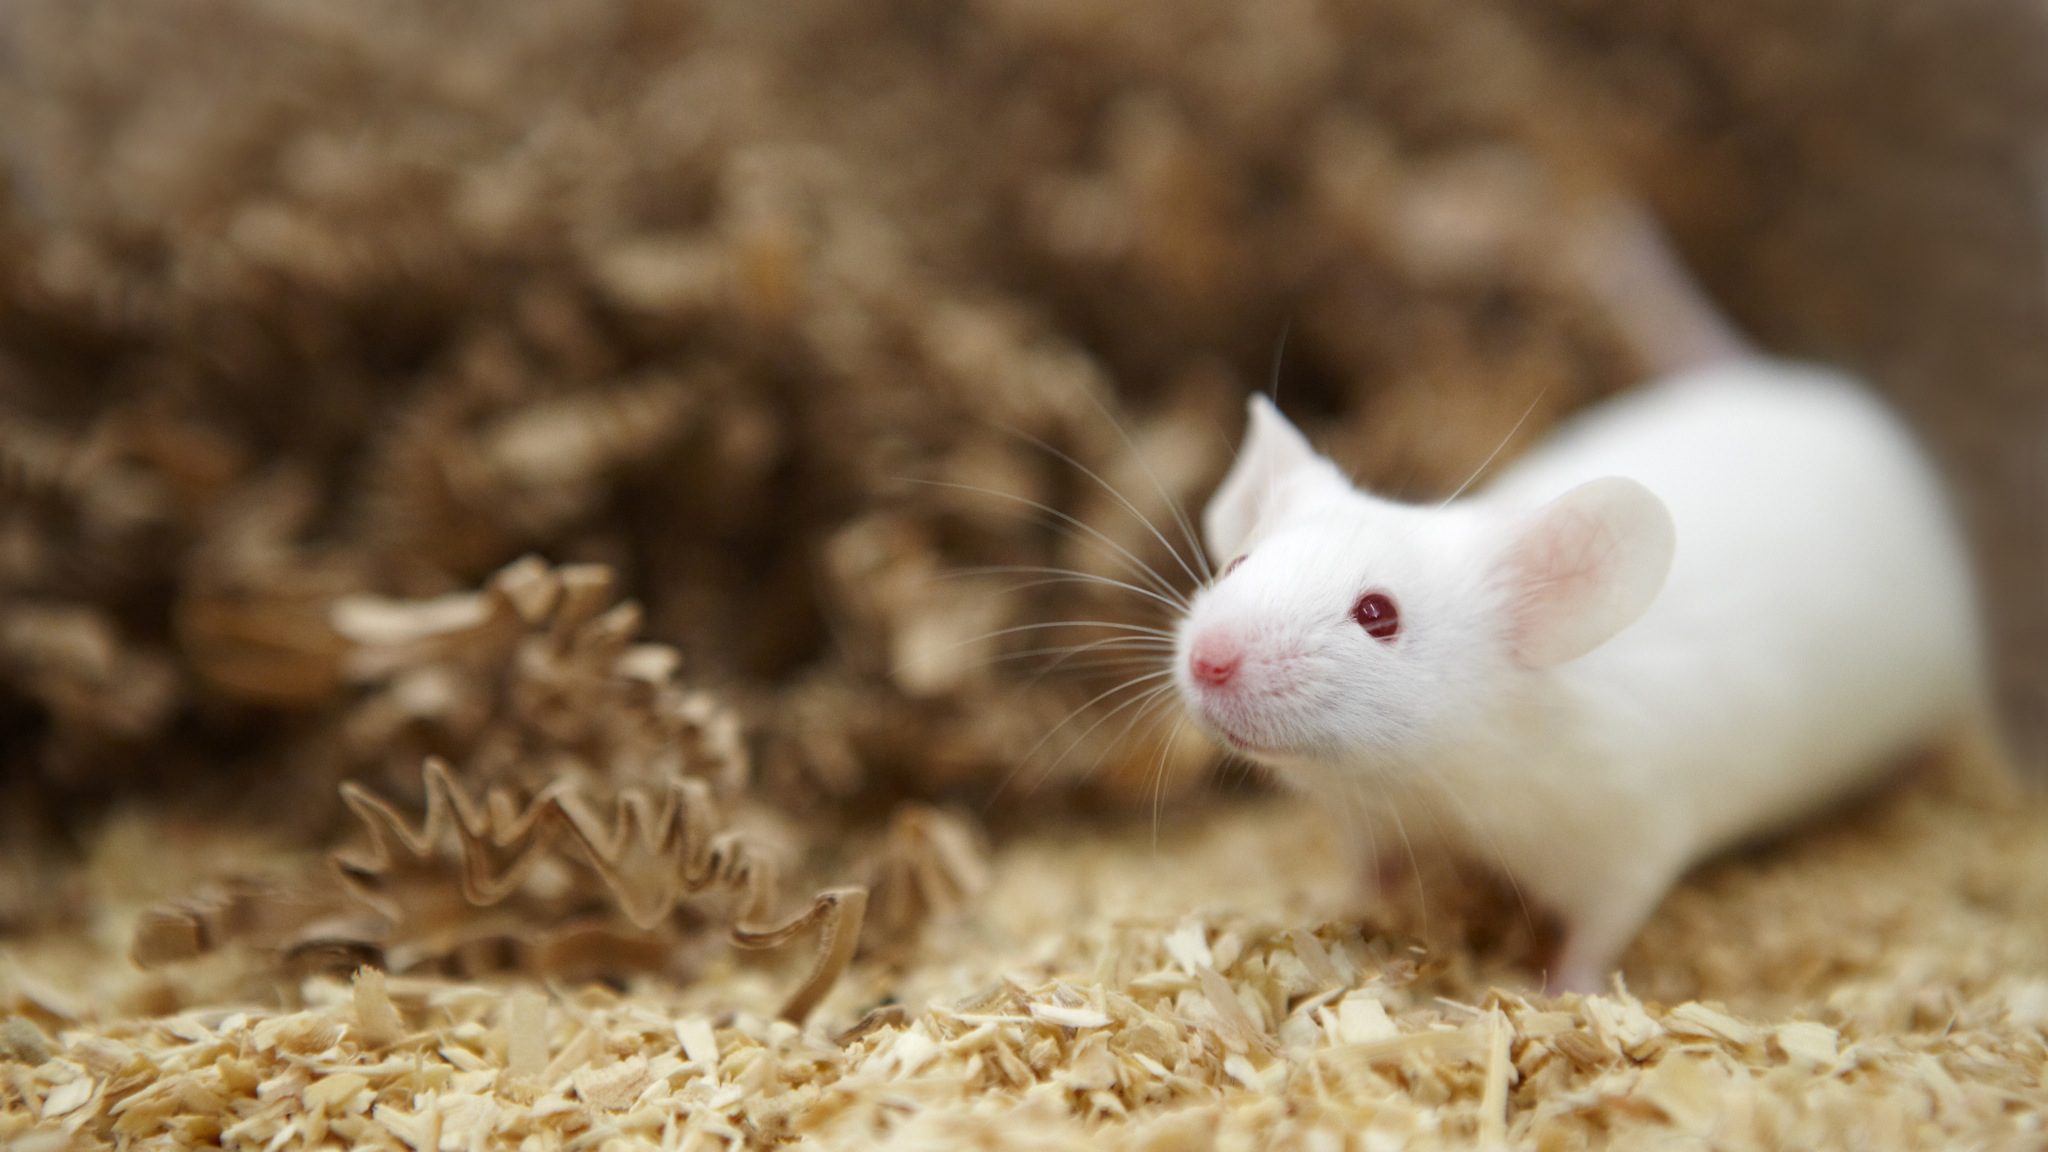 Hunger for likes on social media makes us love foraging mice